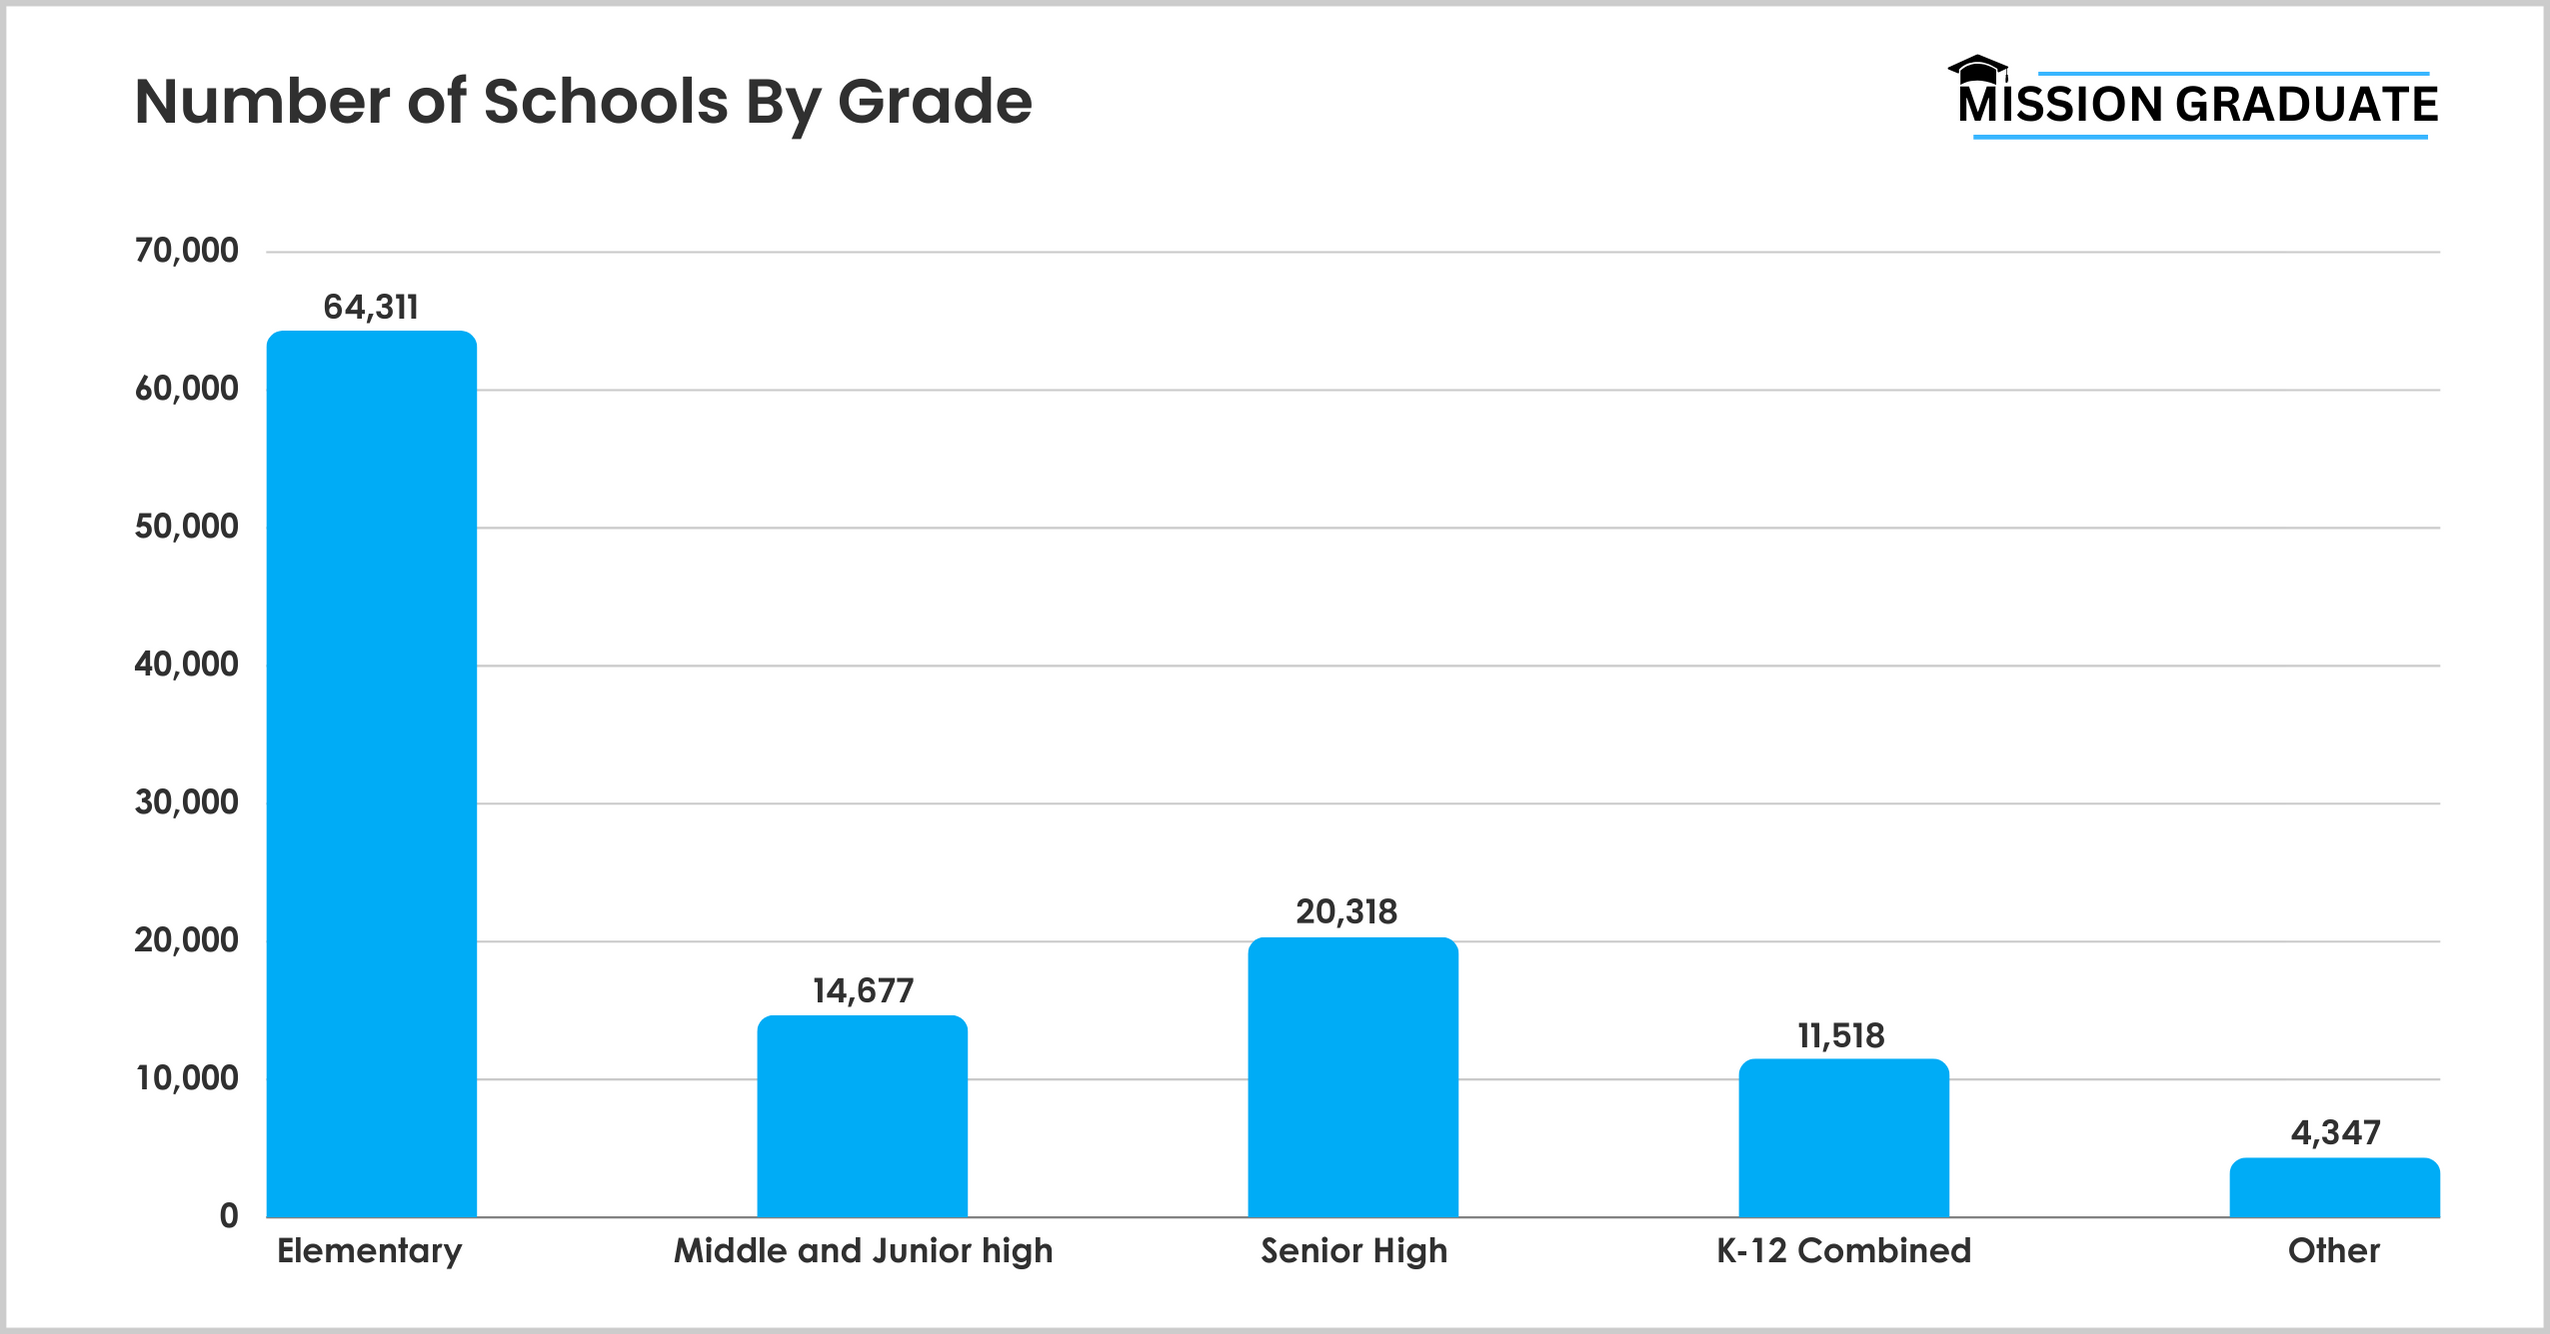 Number of Schools By Grade